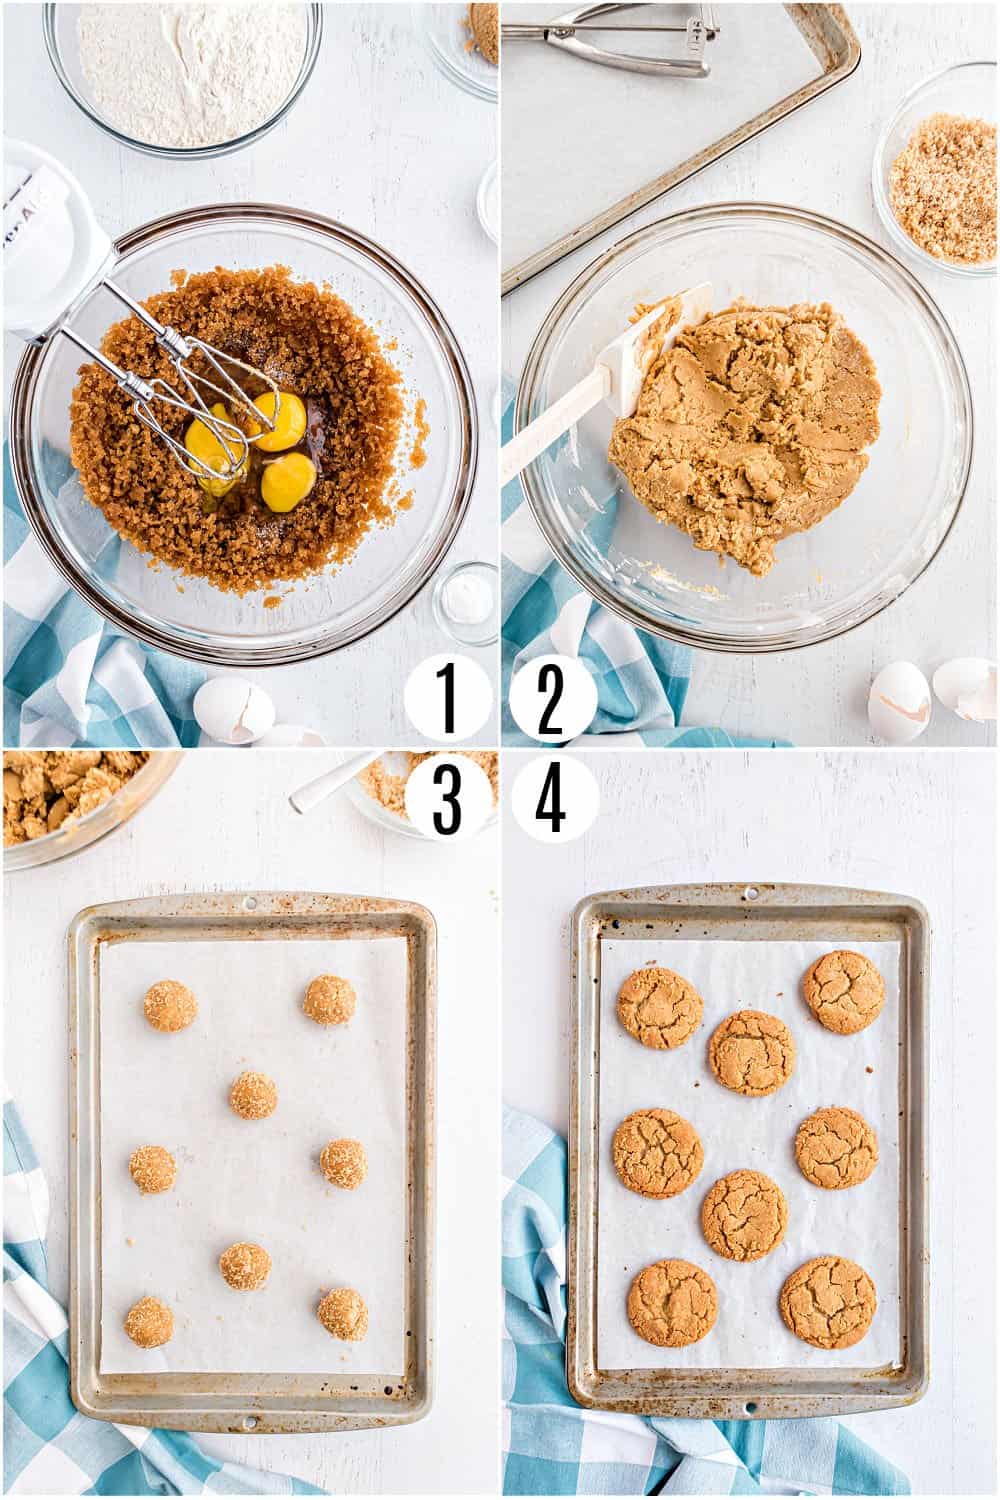 Step by step photos showing how to make butterscotch cookies.